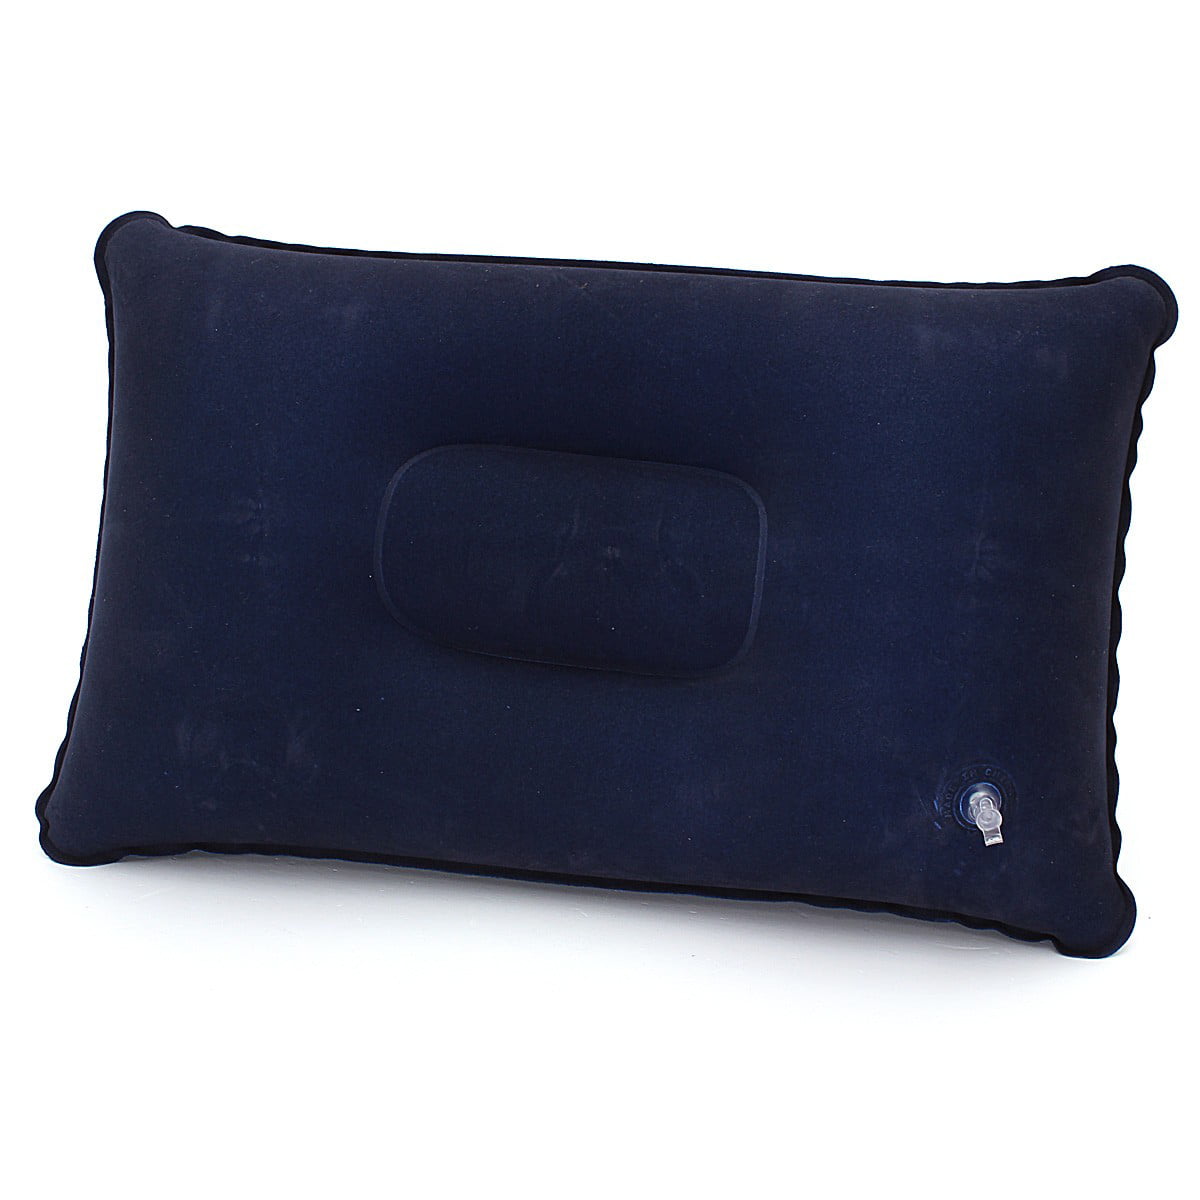 Wenjie Inflatable Pillow Comfortable Outdoor Travel Camping Home Office Sleeping Self-Inflating Portable Pillow PVC Flocking Fleece Dark Blue